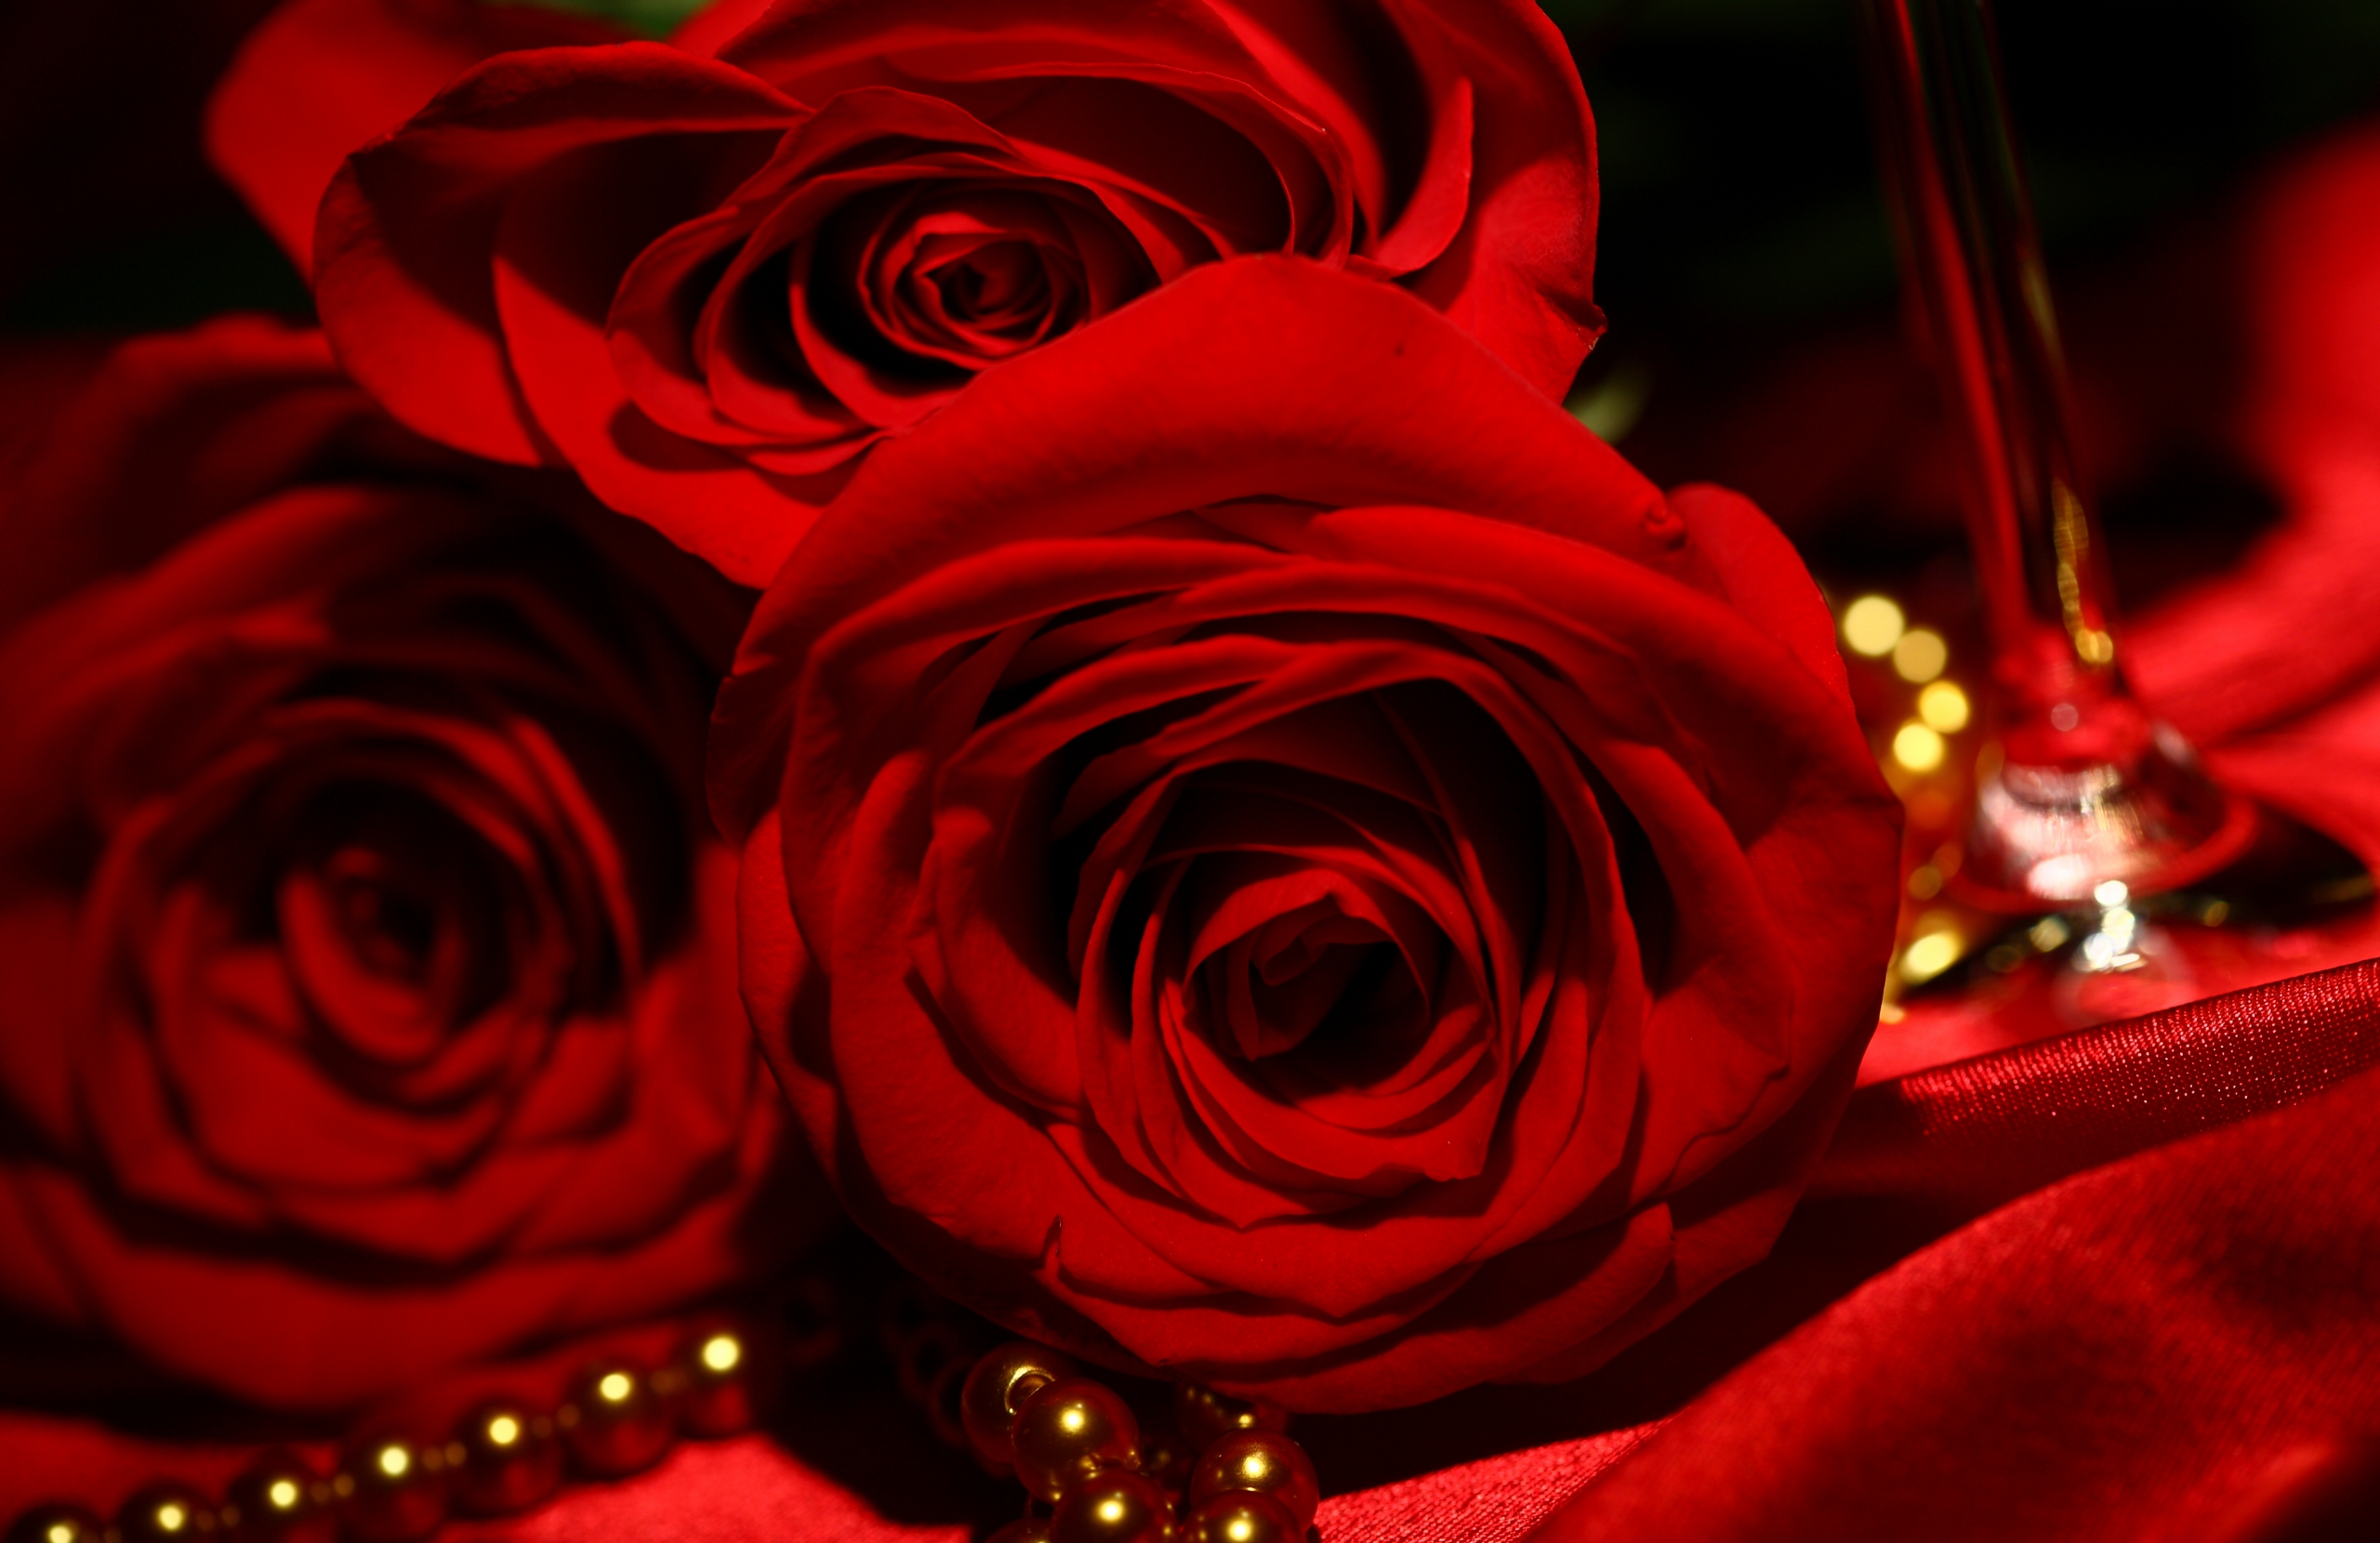 Red Roses Wallpapers HD A33